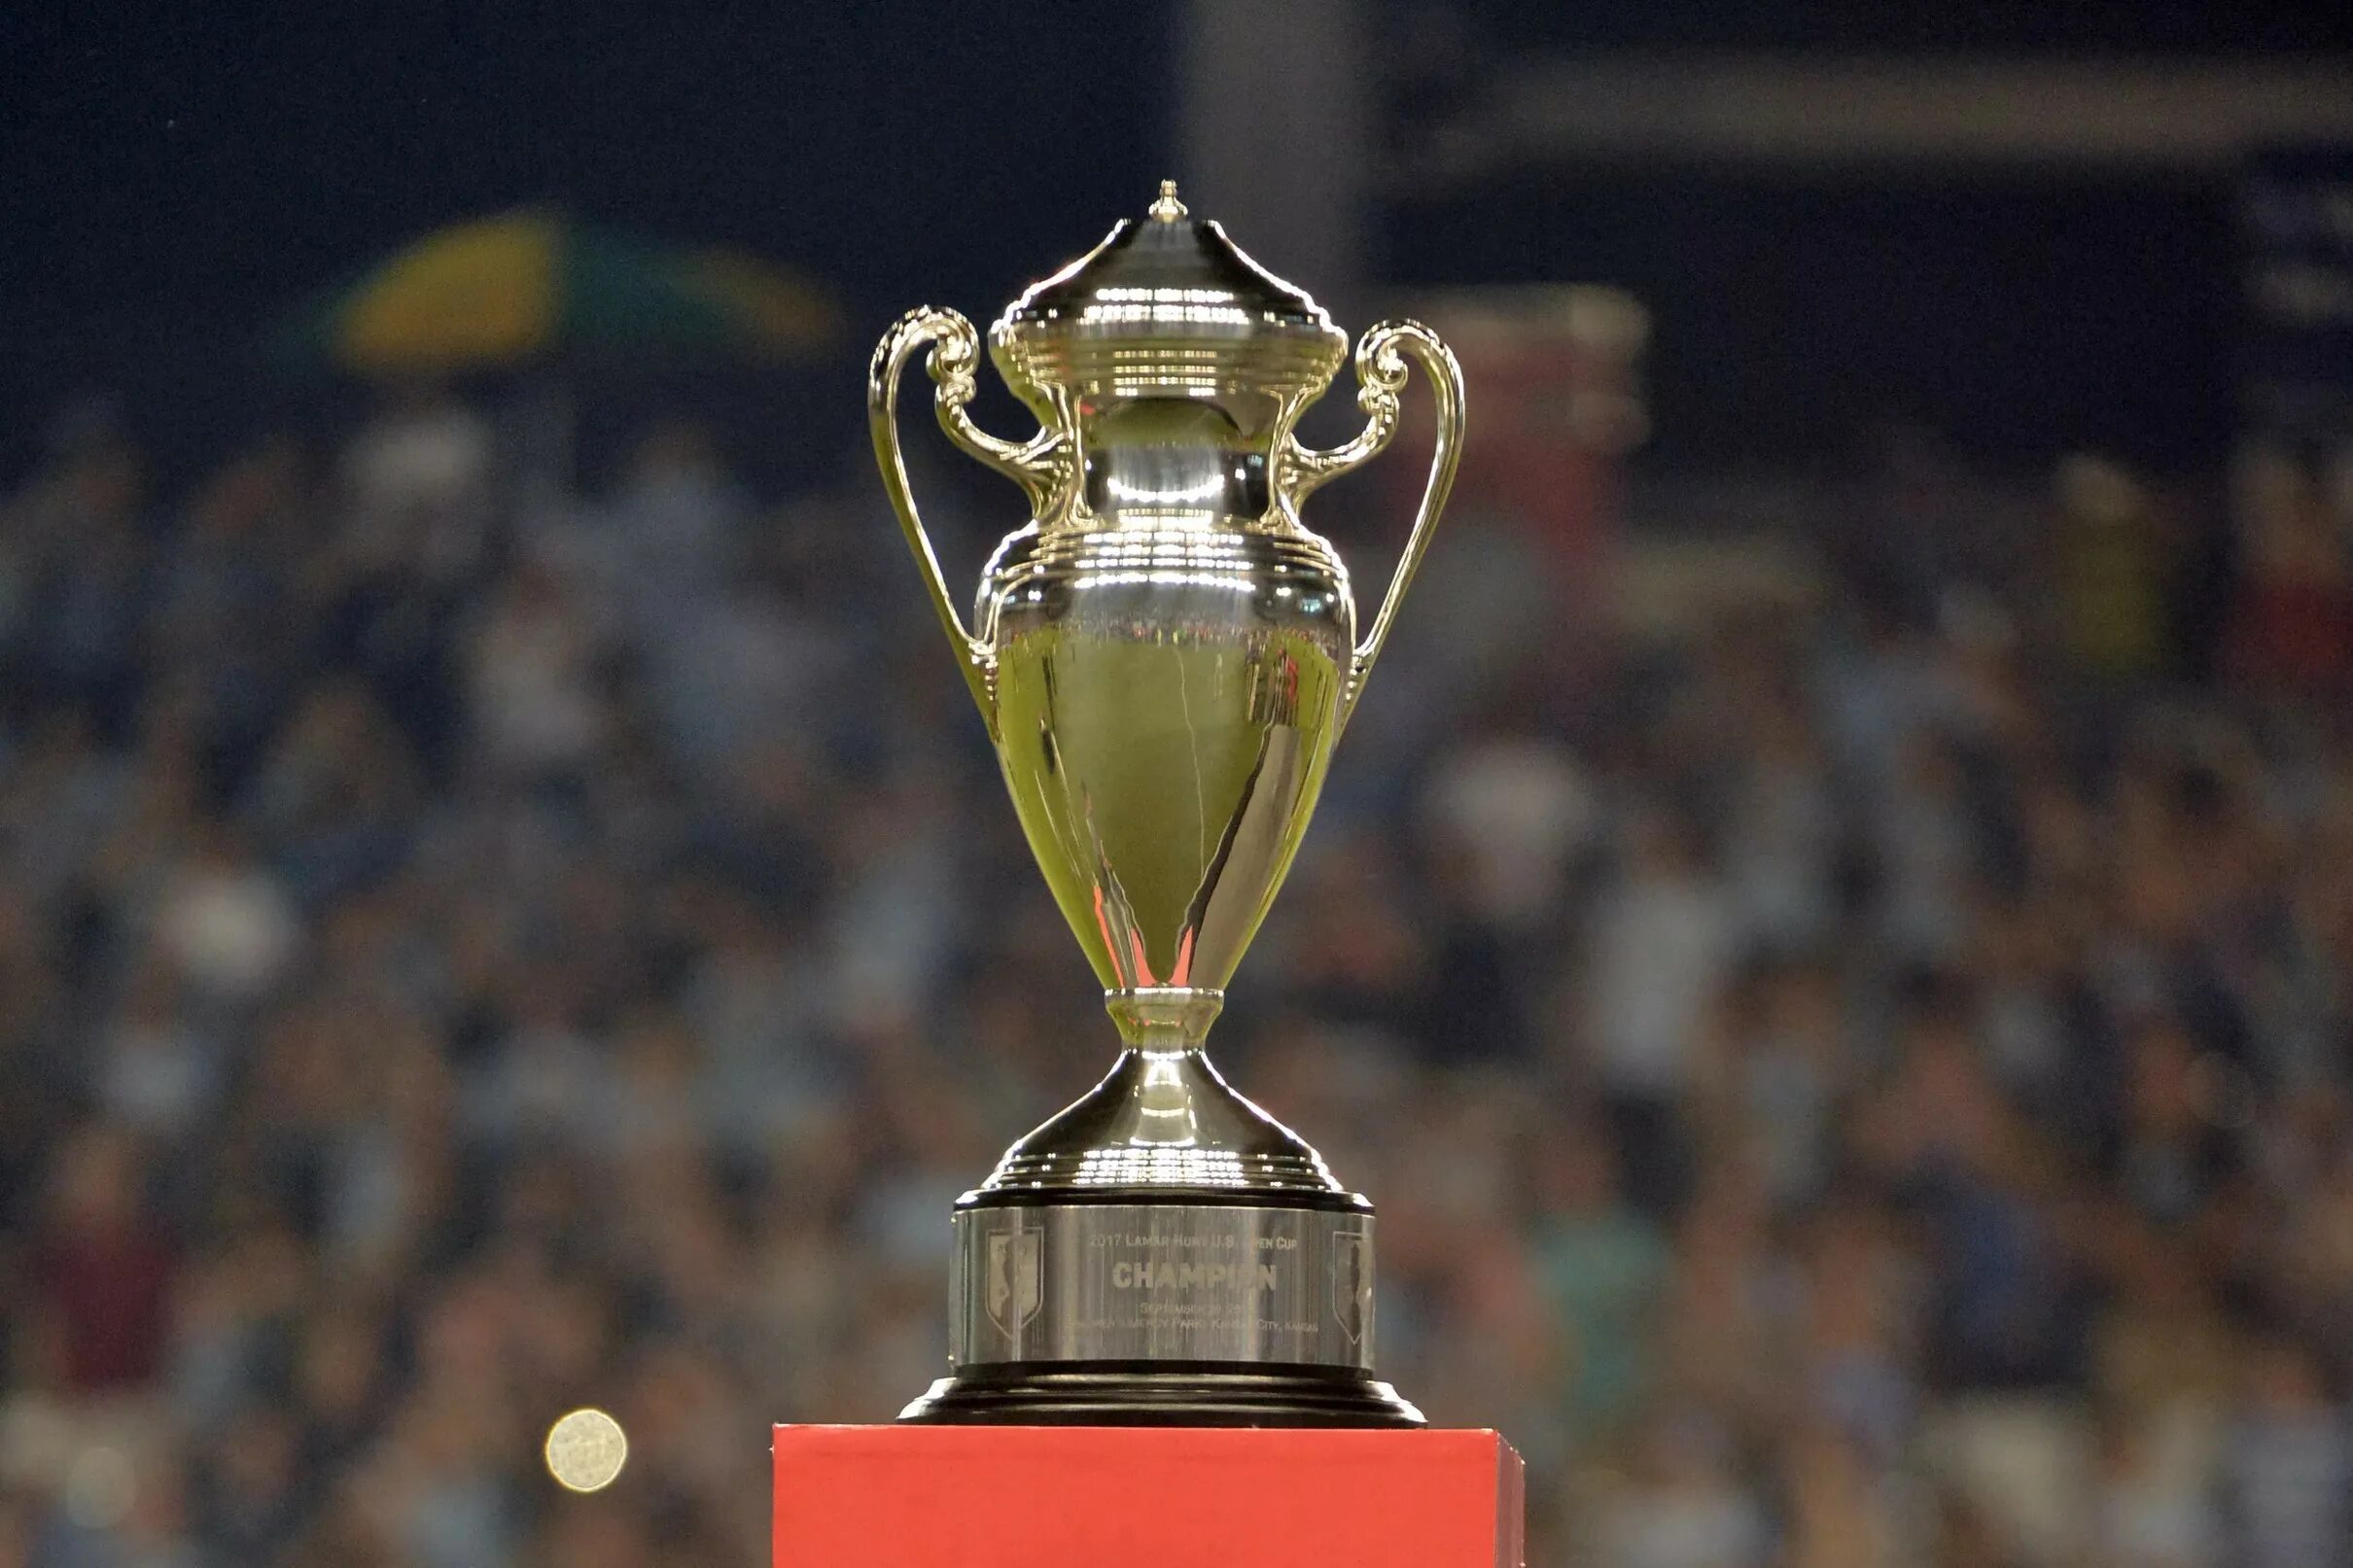 1 us cup. Us open Кубок. Us open Trophy. Трофей us open. МЛС трофей.